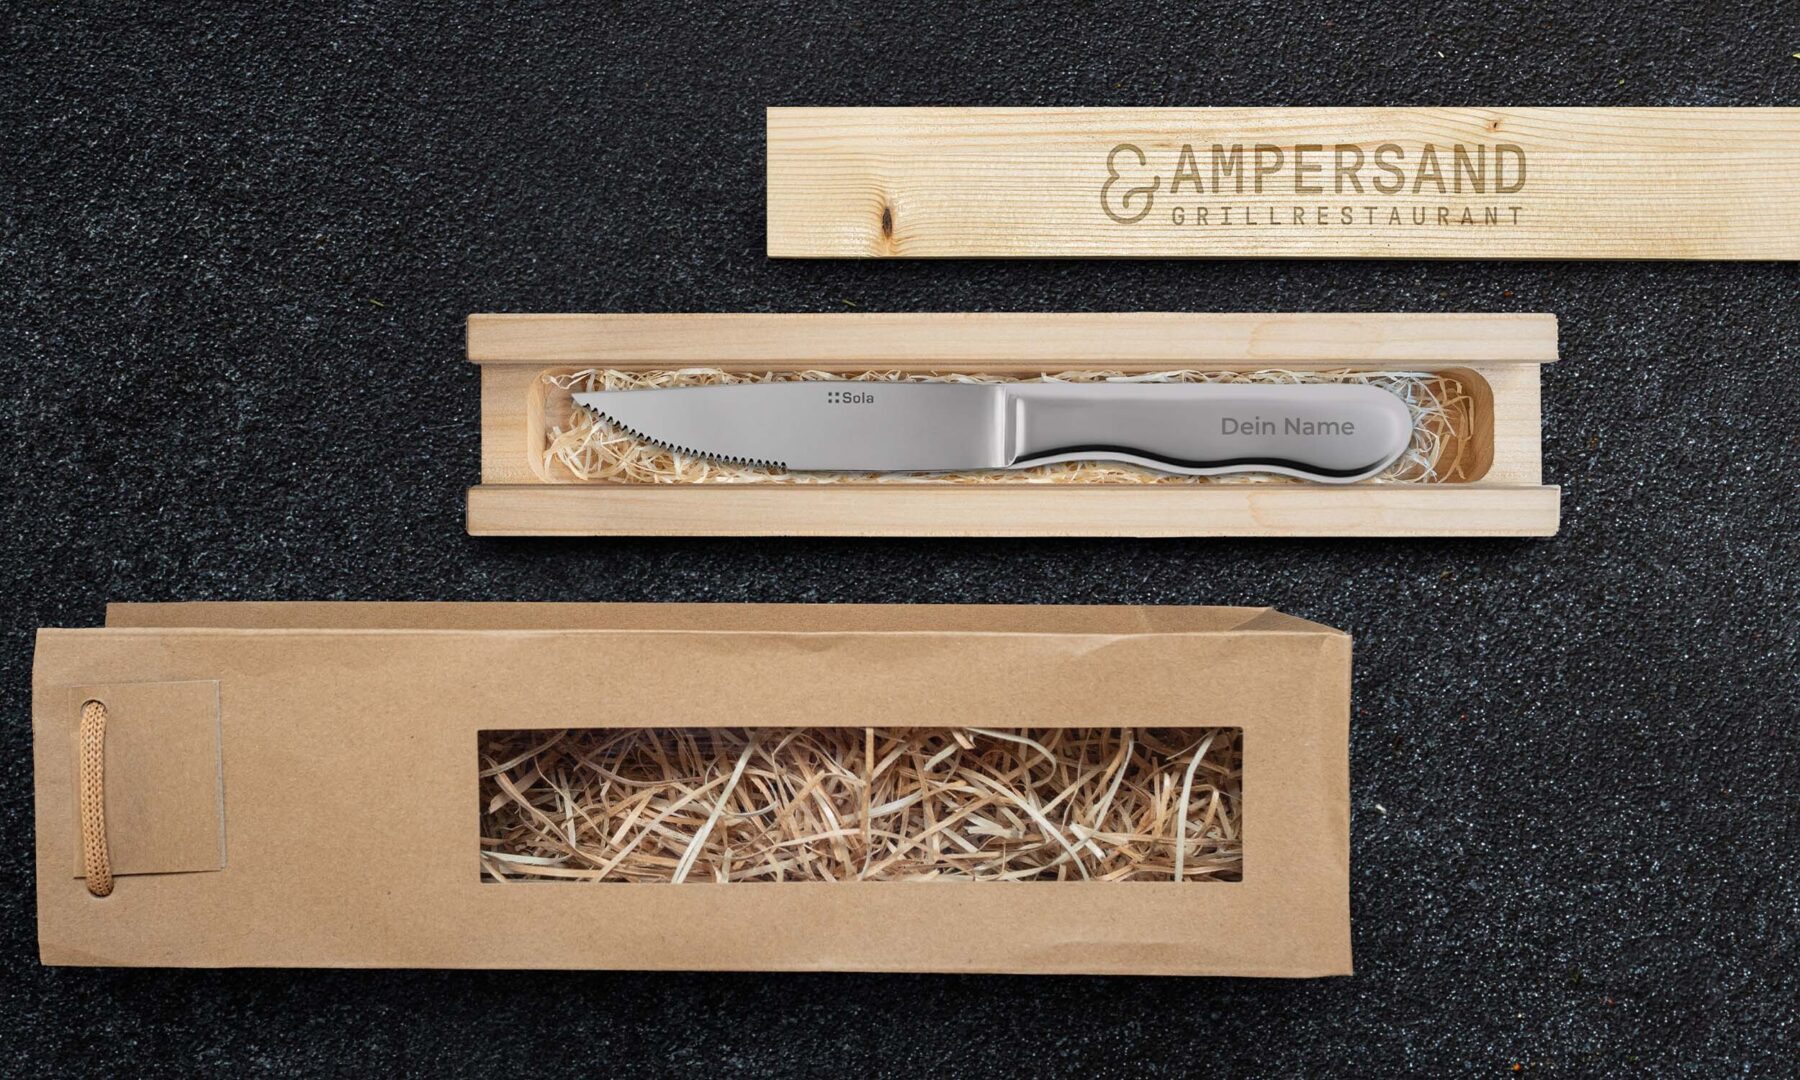 Personalised steak knife as a gift